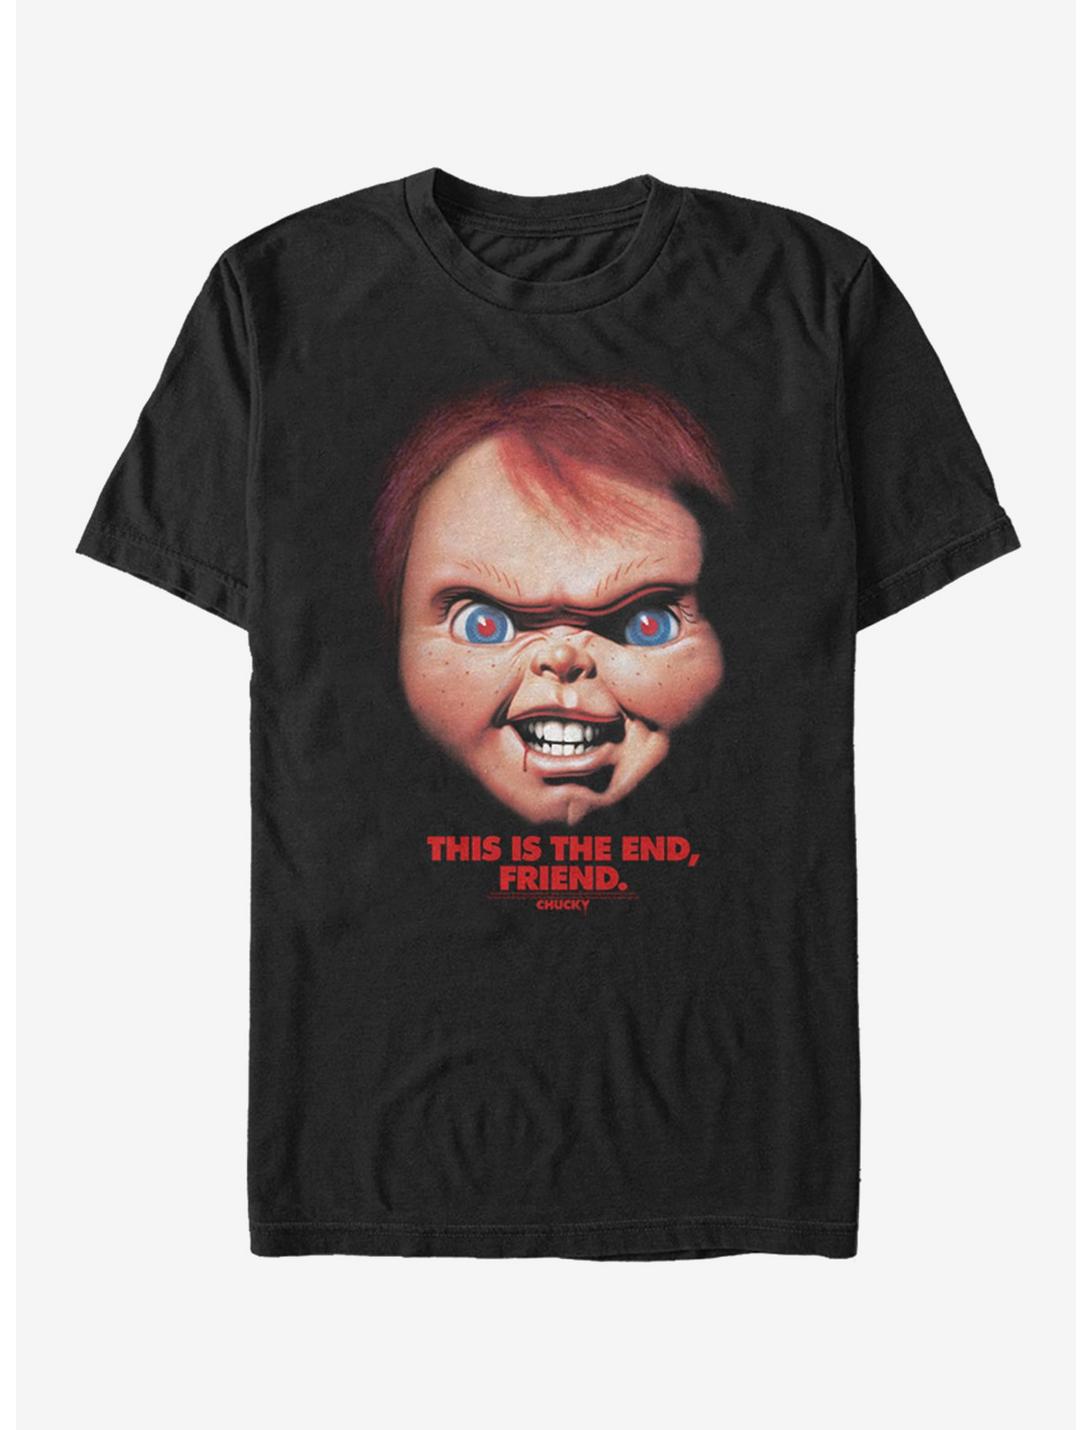 Chucky This is the End T-Shirt, BLACK, hi-res